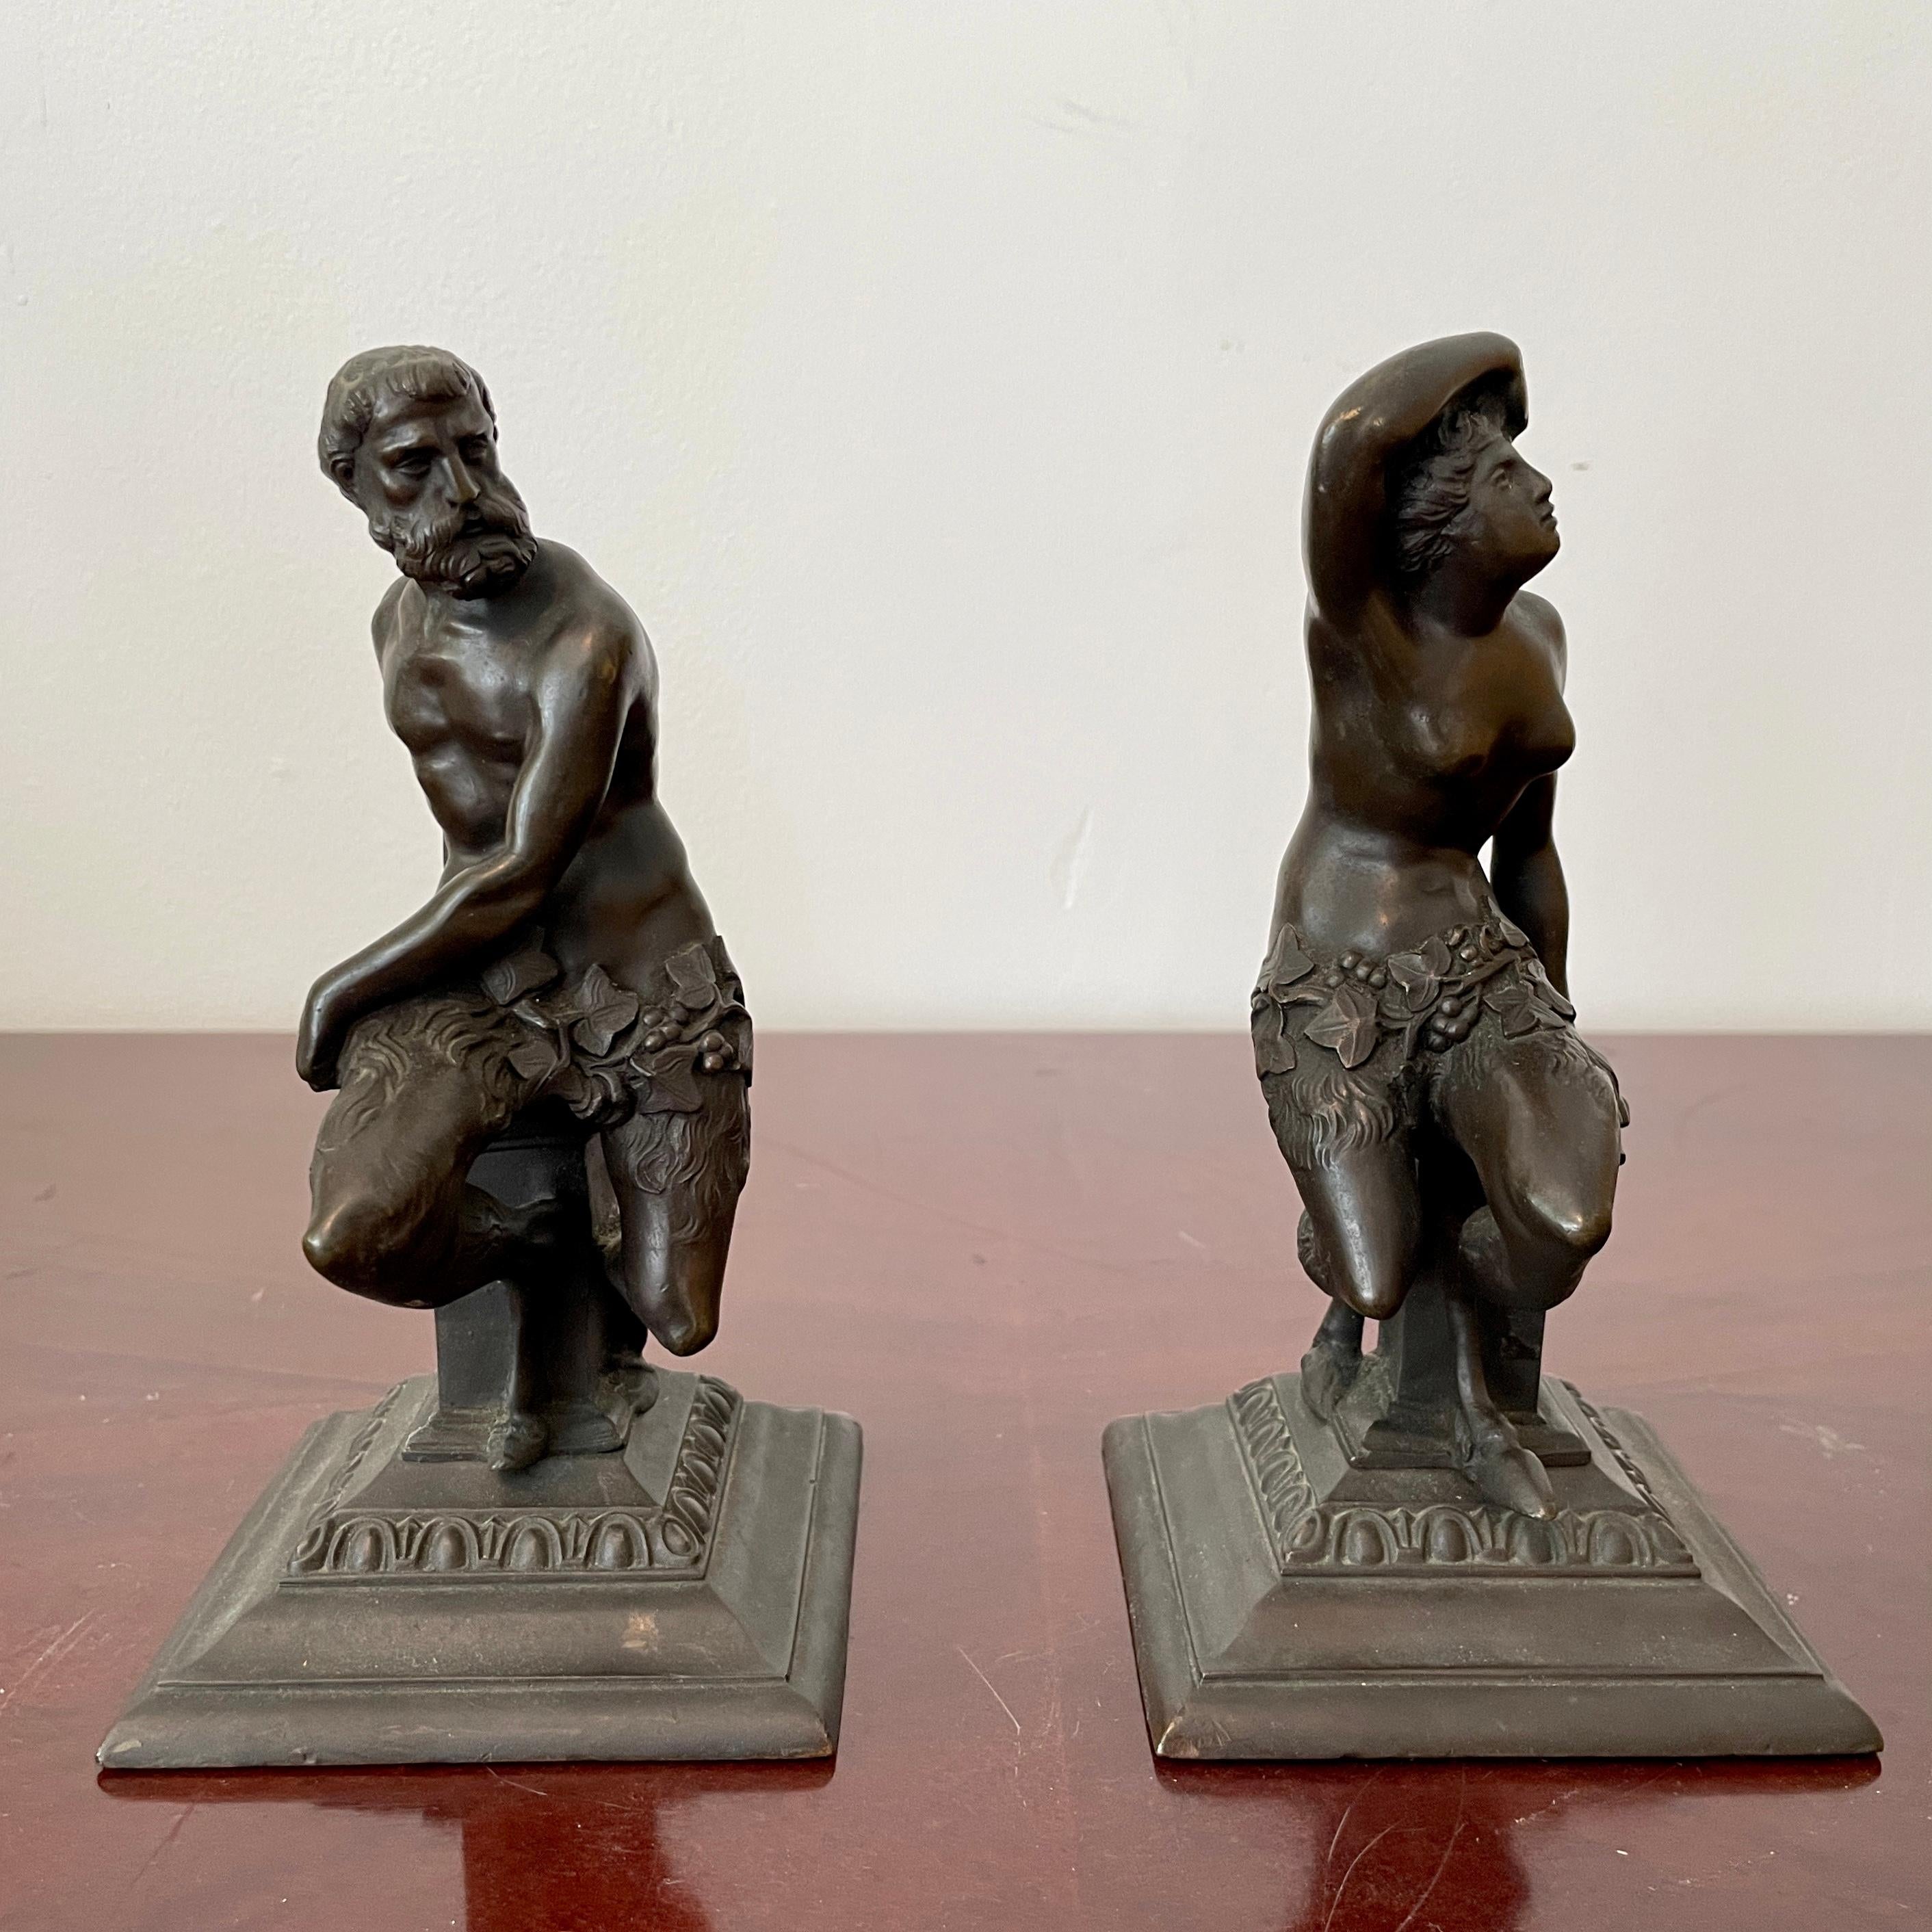 Classic pair of bronze figurines of a man and a woman. Great addition to your classic inspired interiors.